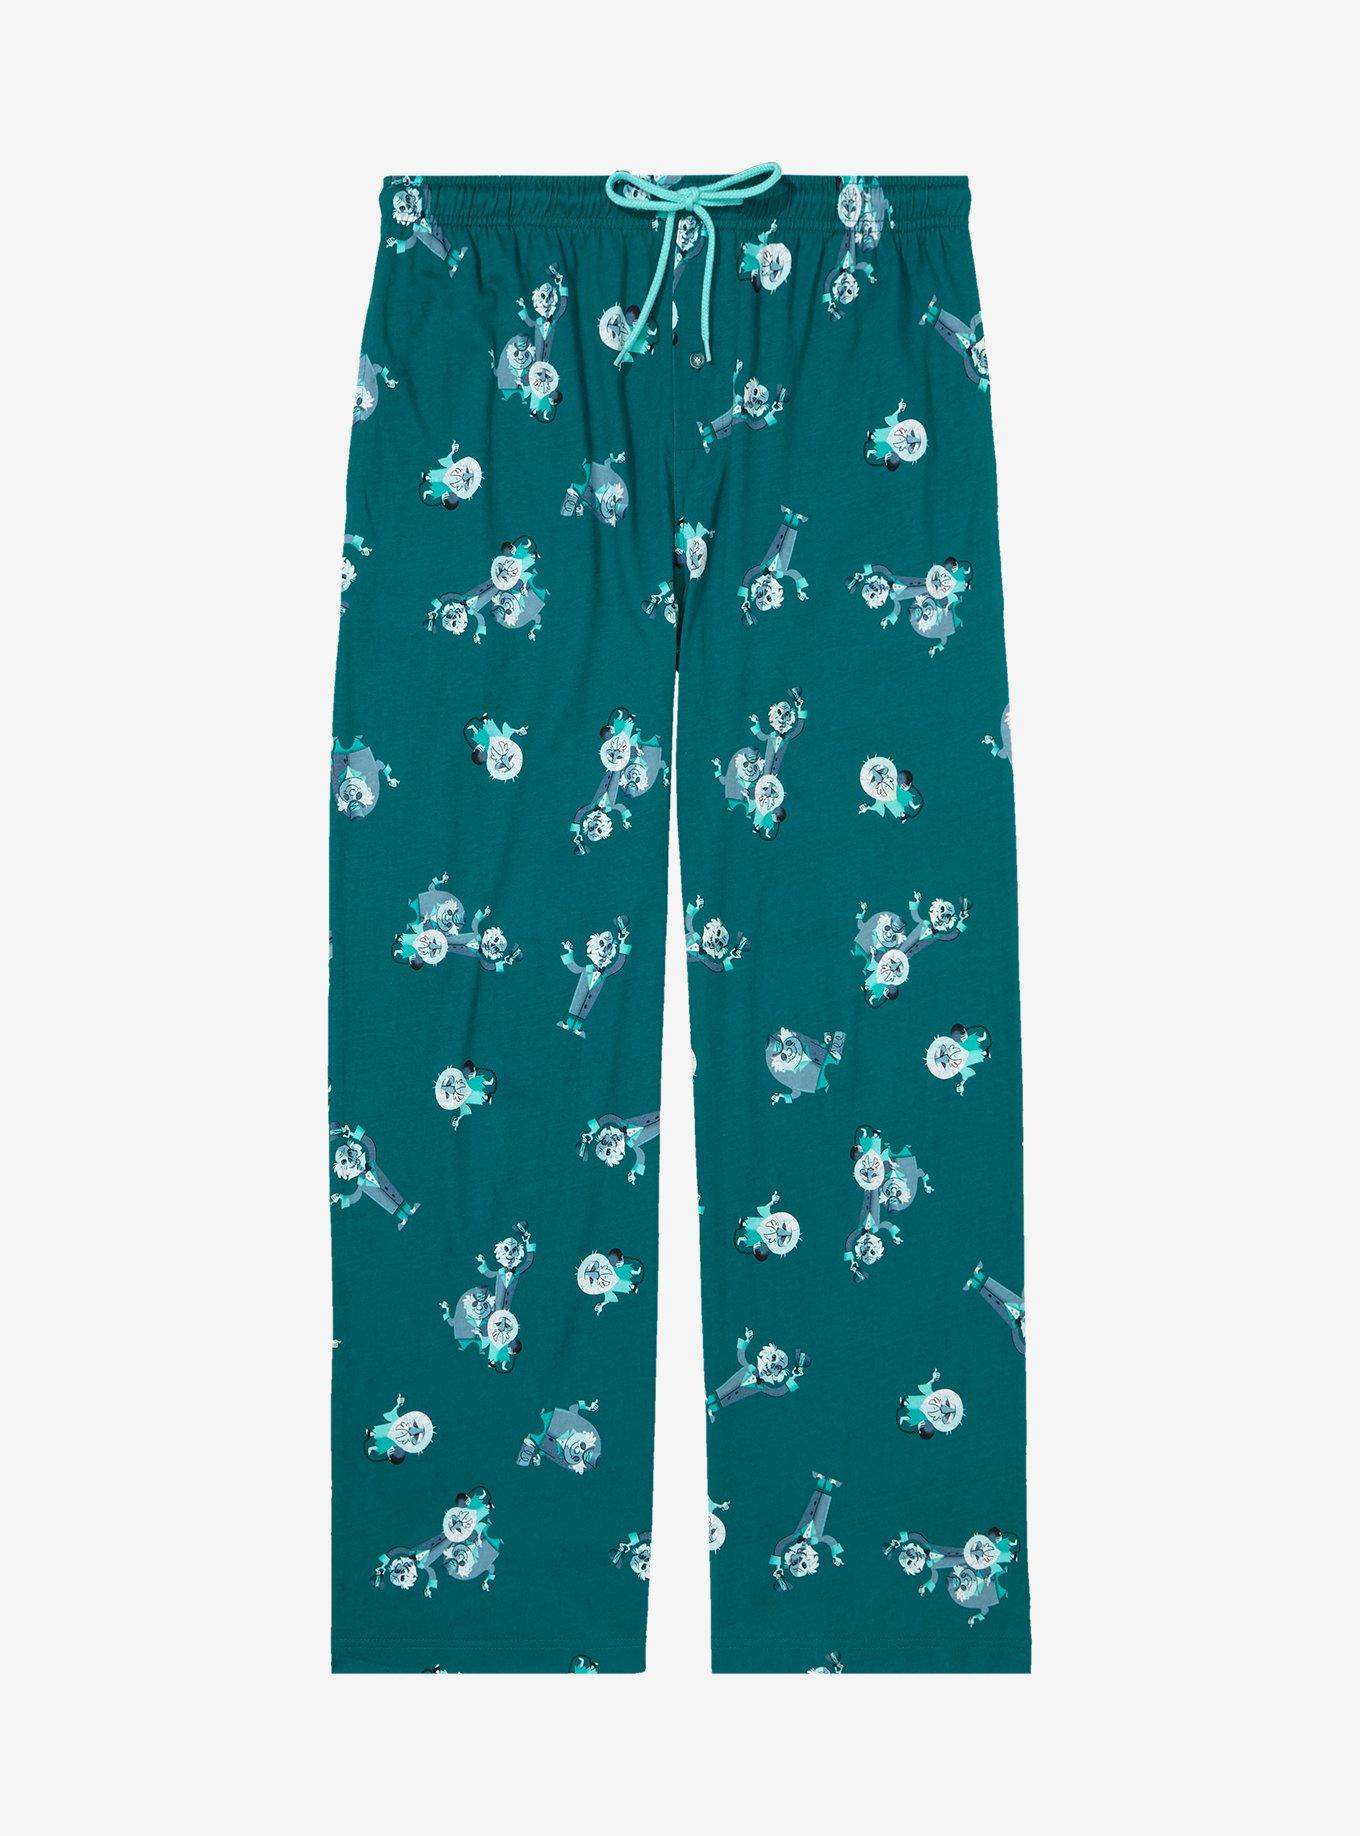 Disney The Haunted Mansion Hitchhiking Ghosts Allover Print Sleep Pants - BoxLunch Exclusive, FOREST GREEN, hi-res